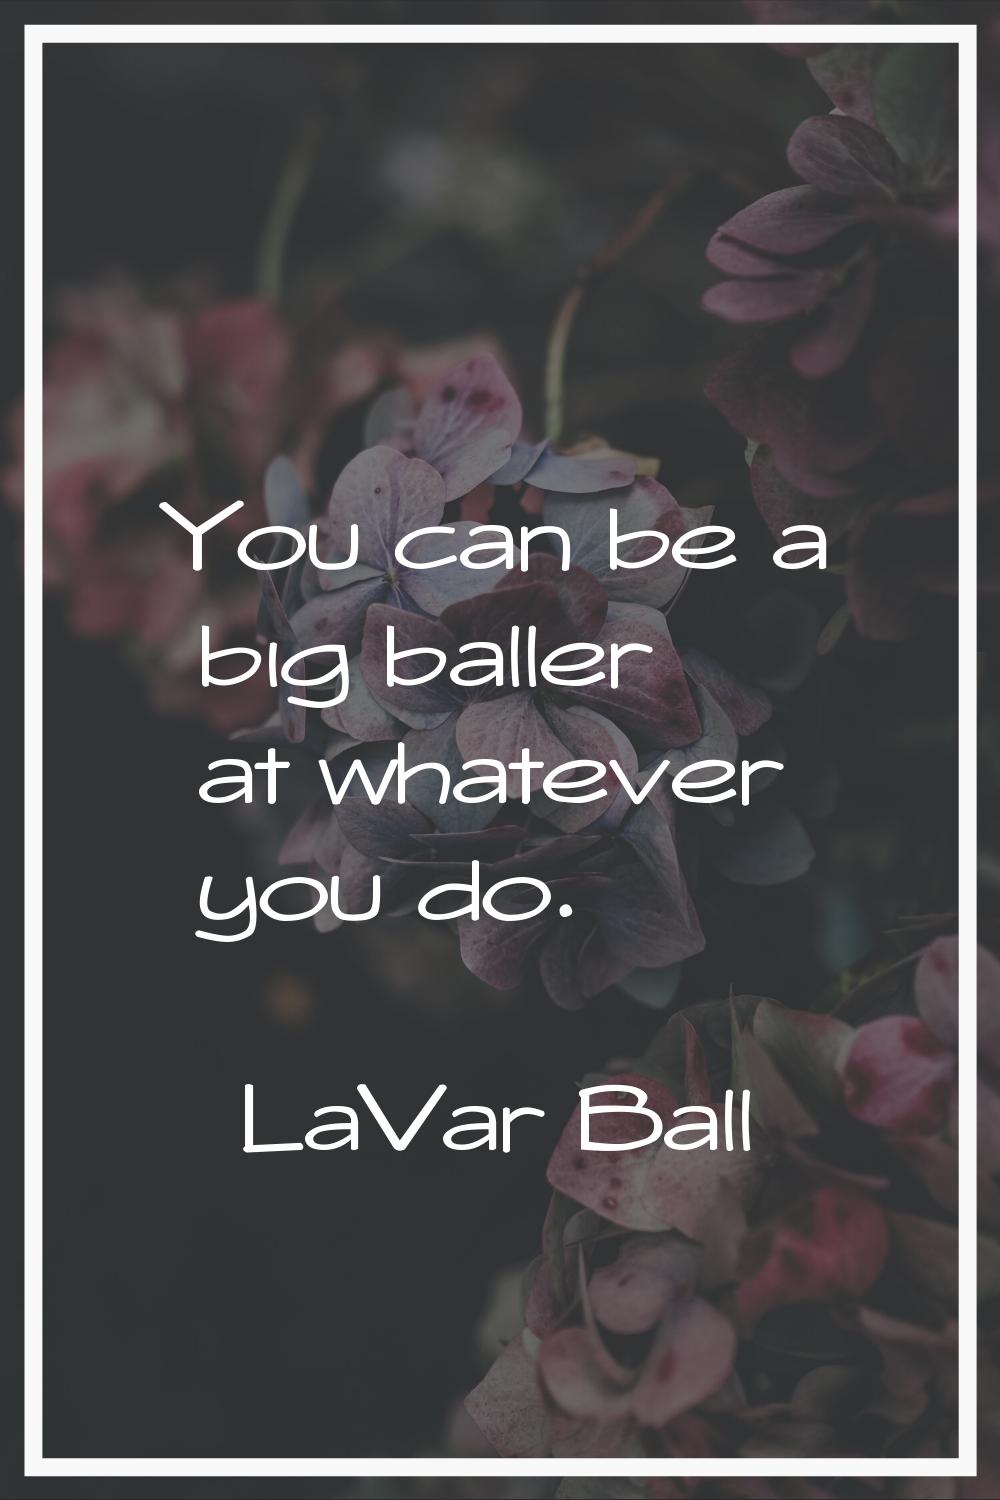 You can be a big baller at whatever you do.